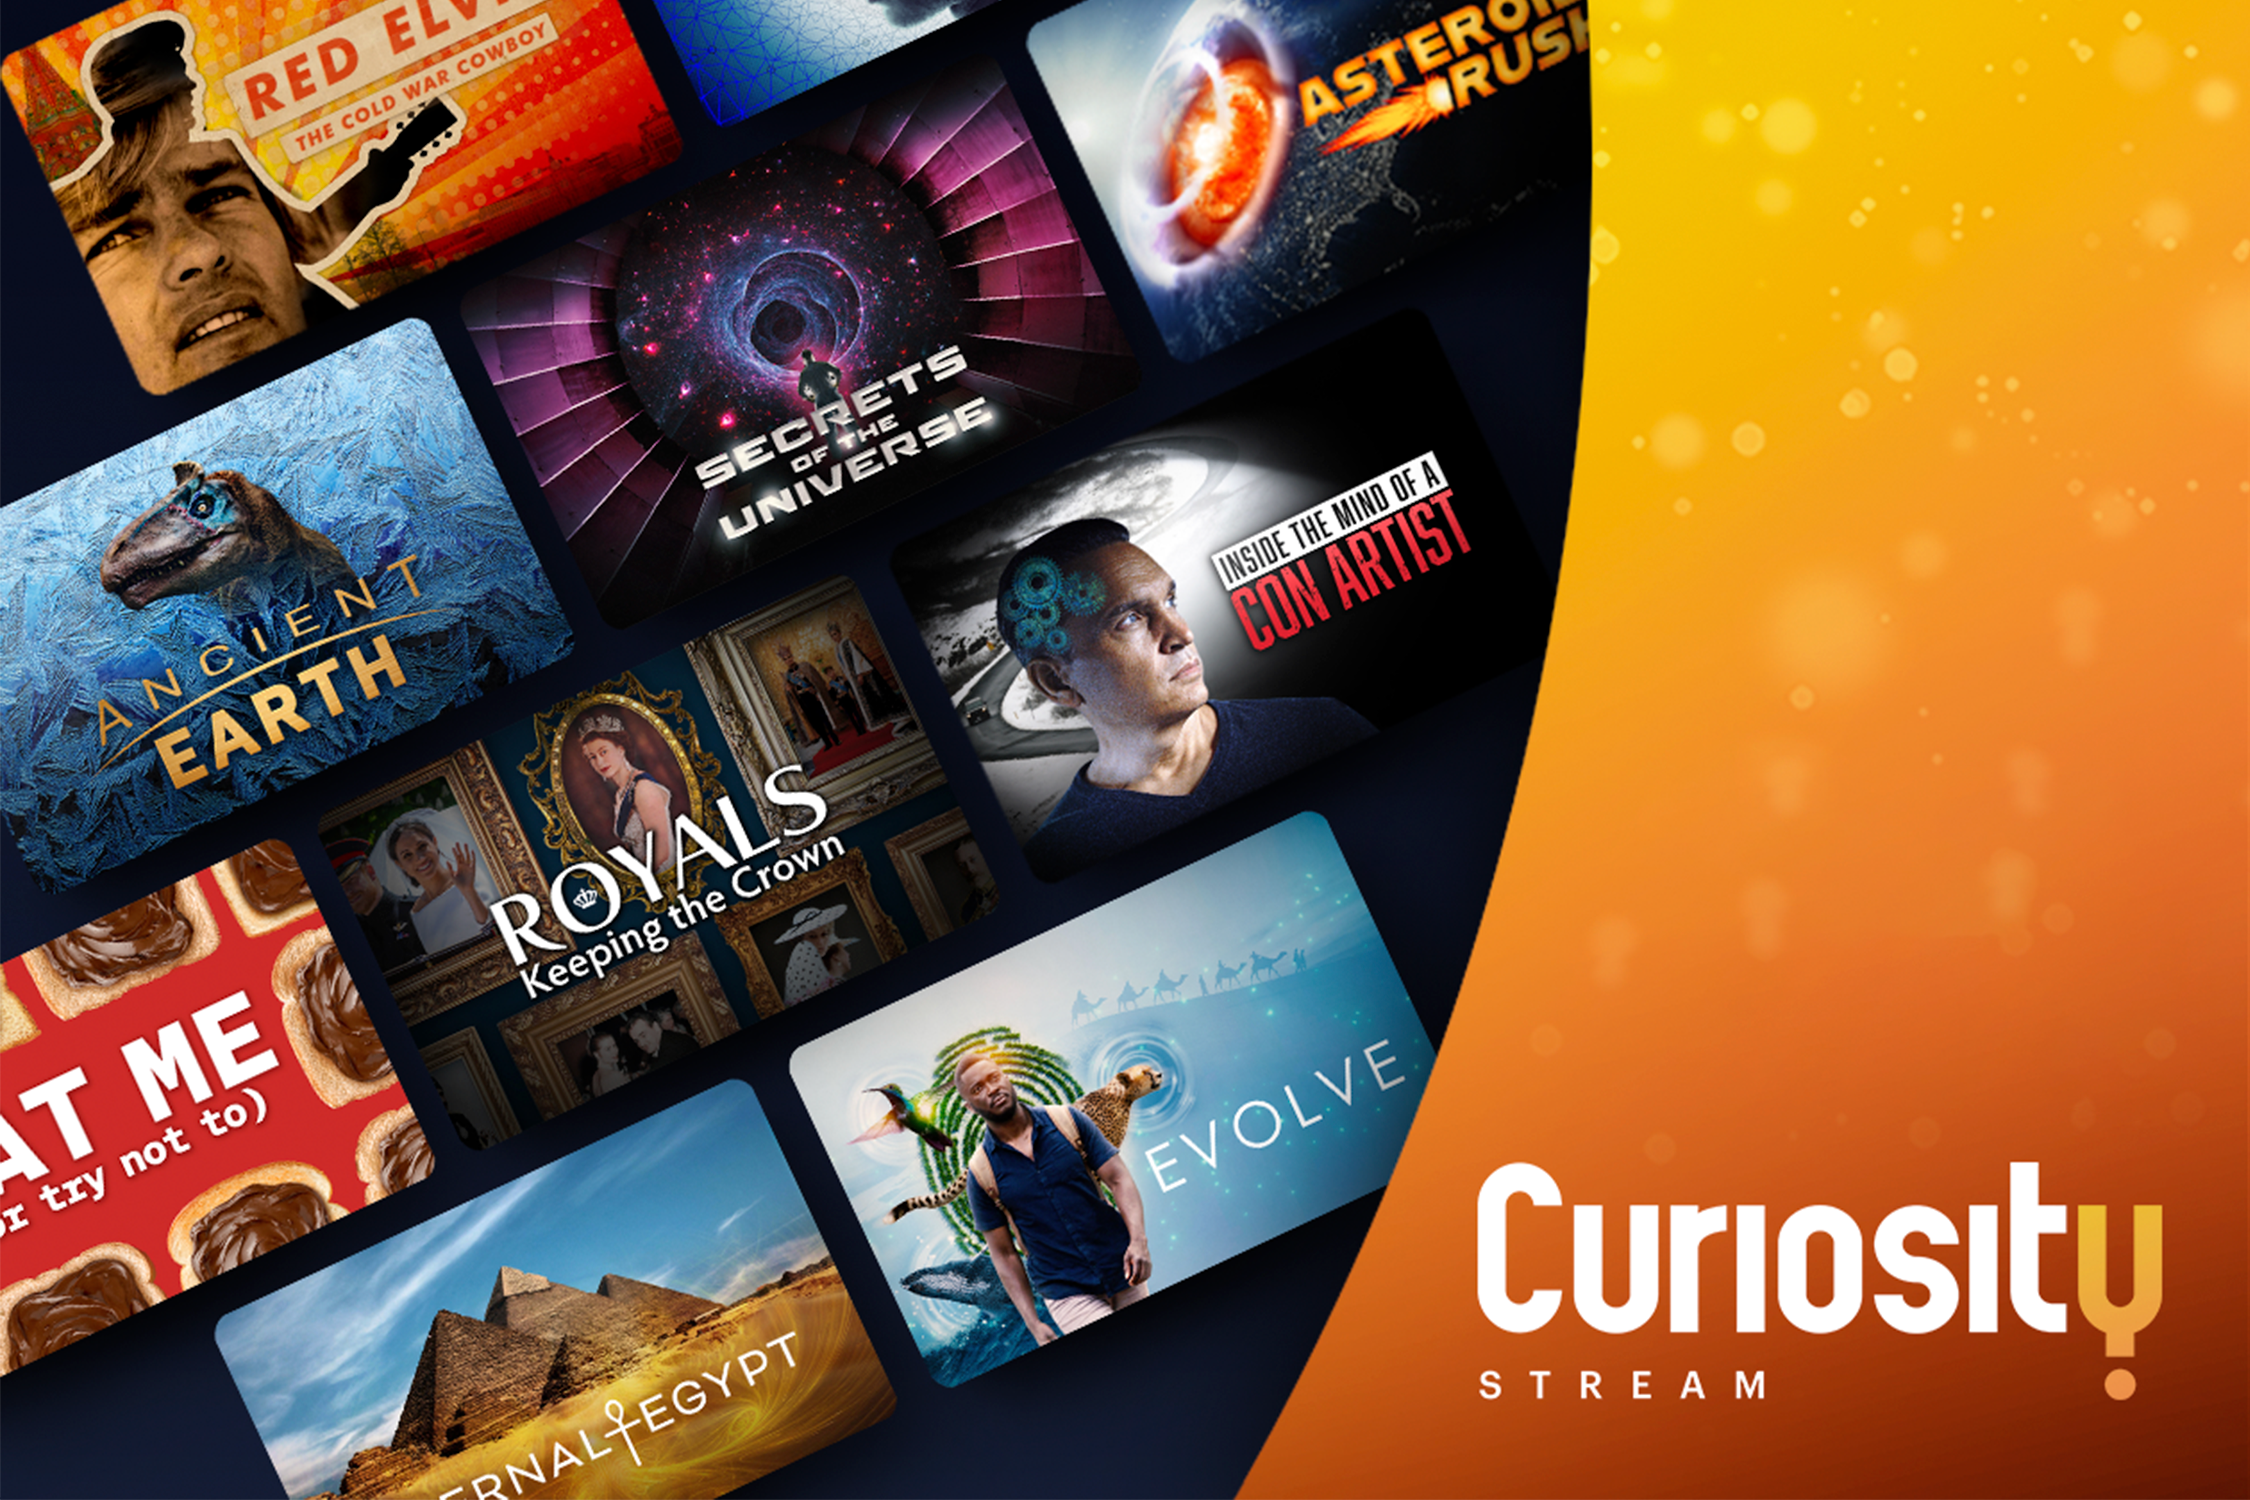 A lifetime of Curiosity Stream is more than $200 off now